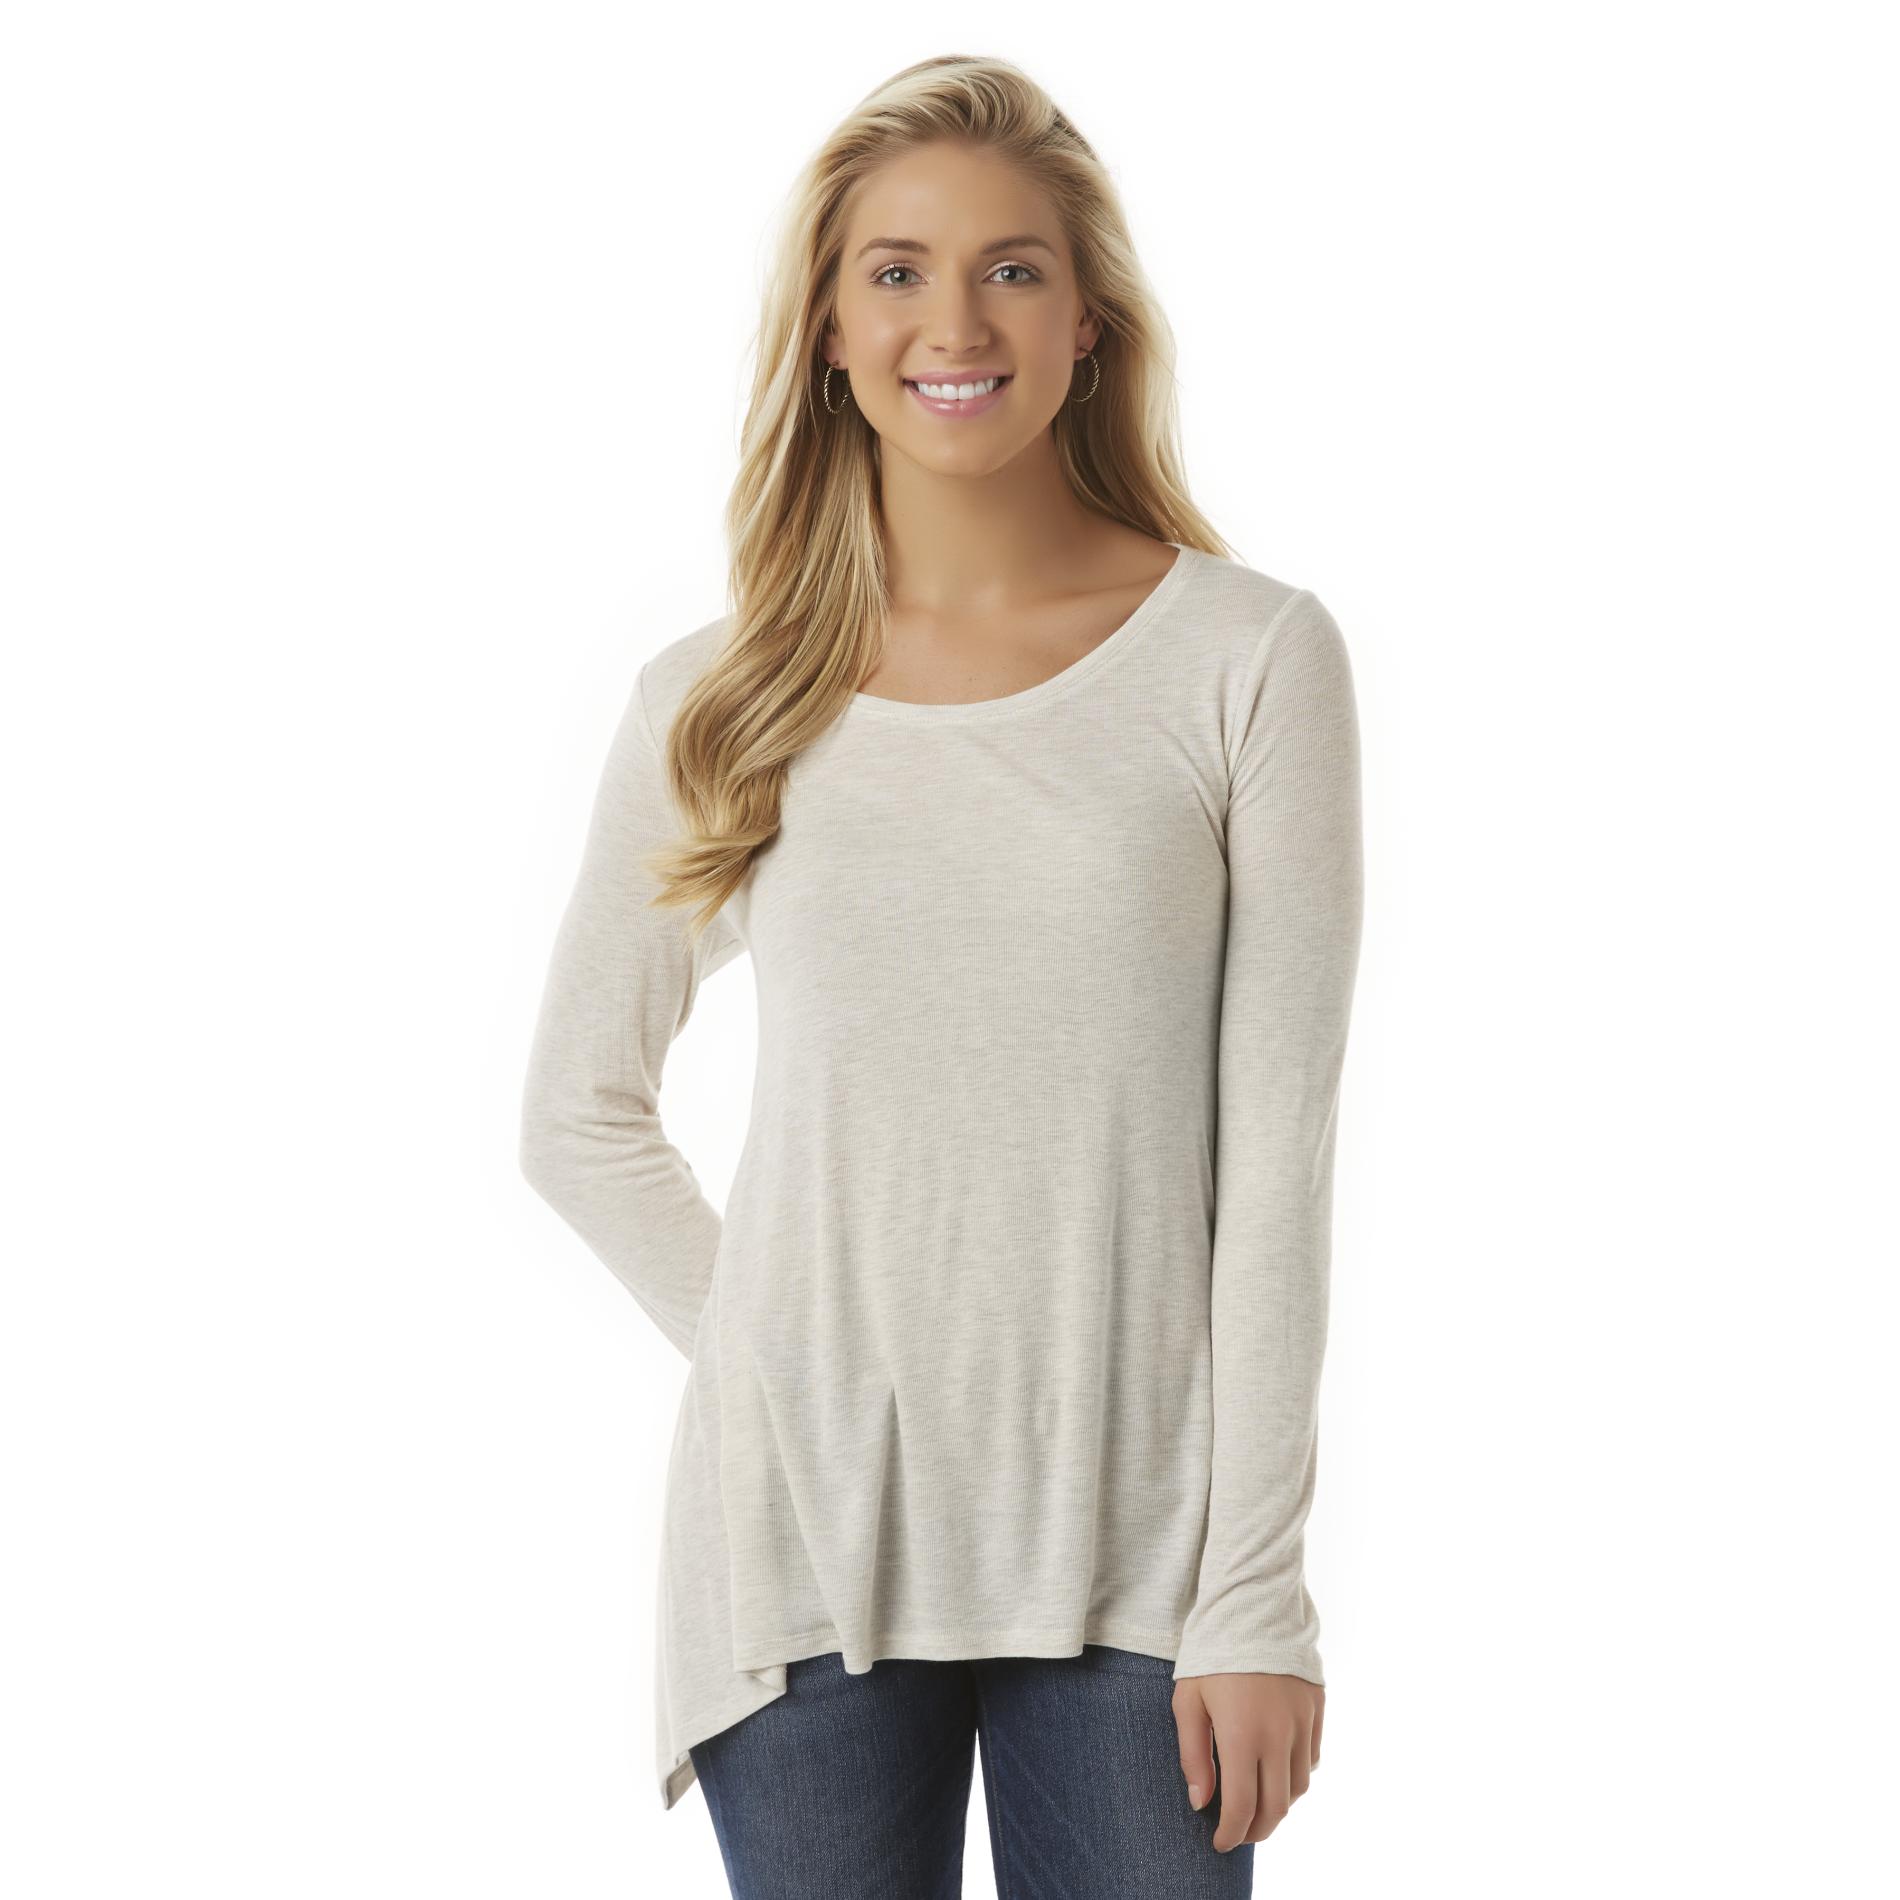 Simply Styled Women's Swing Top